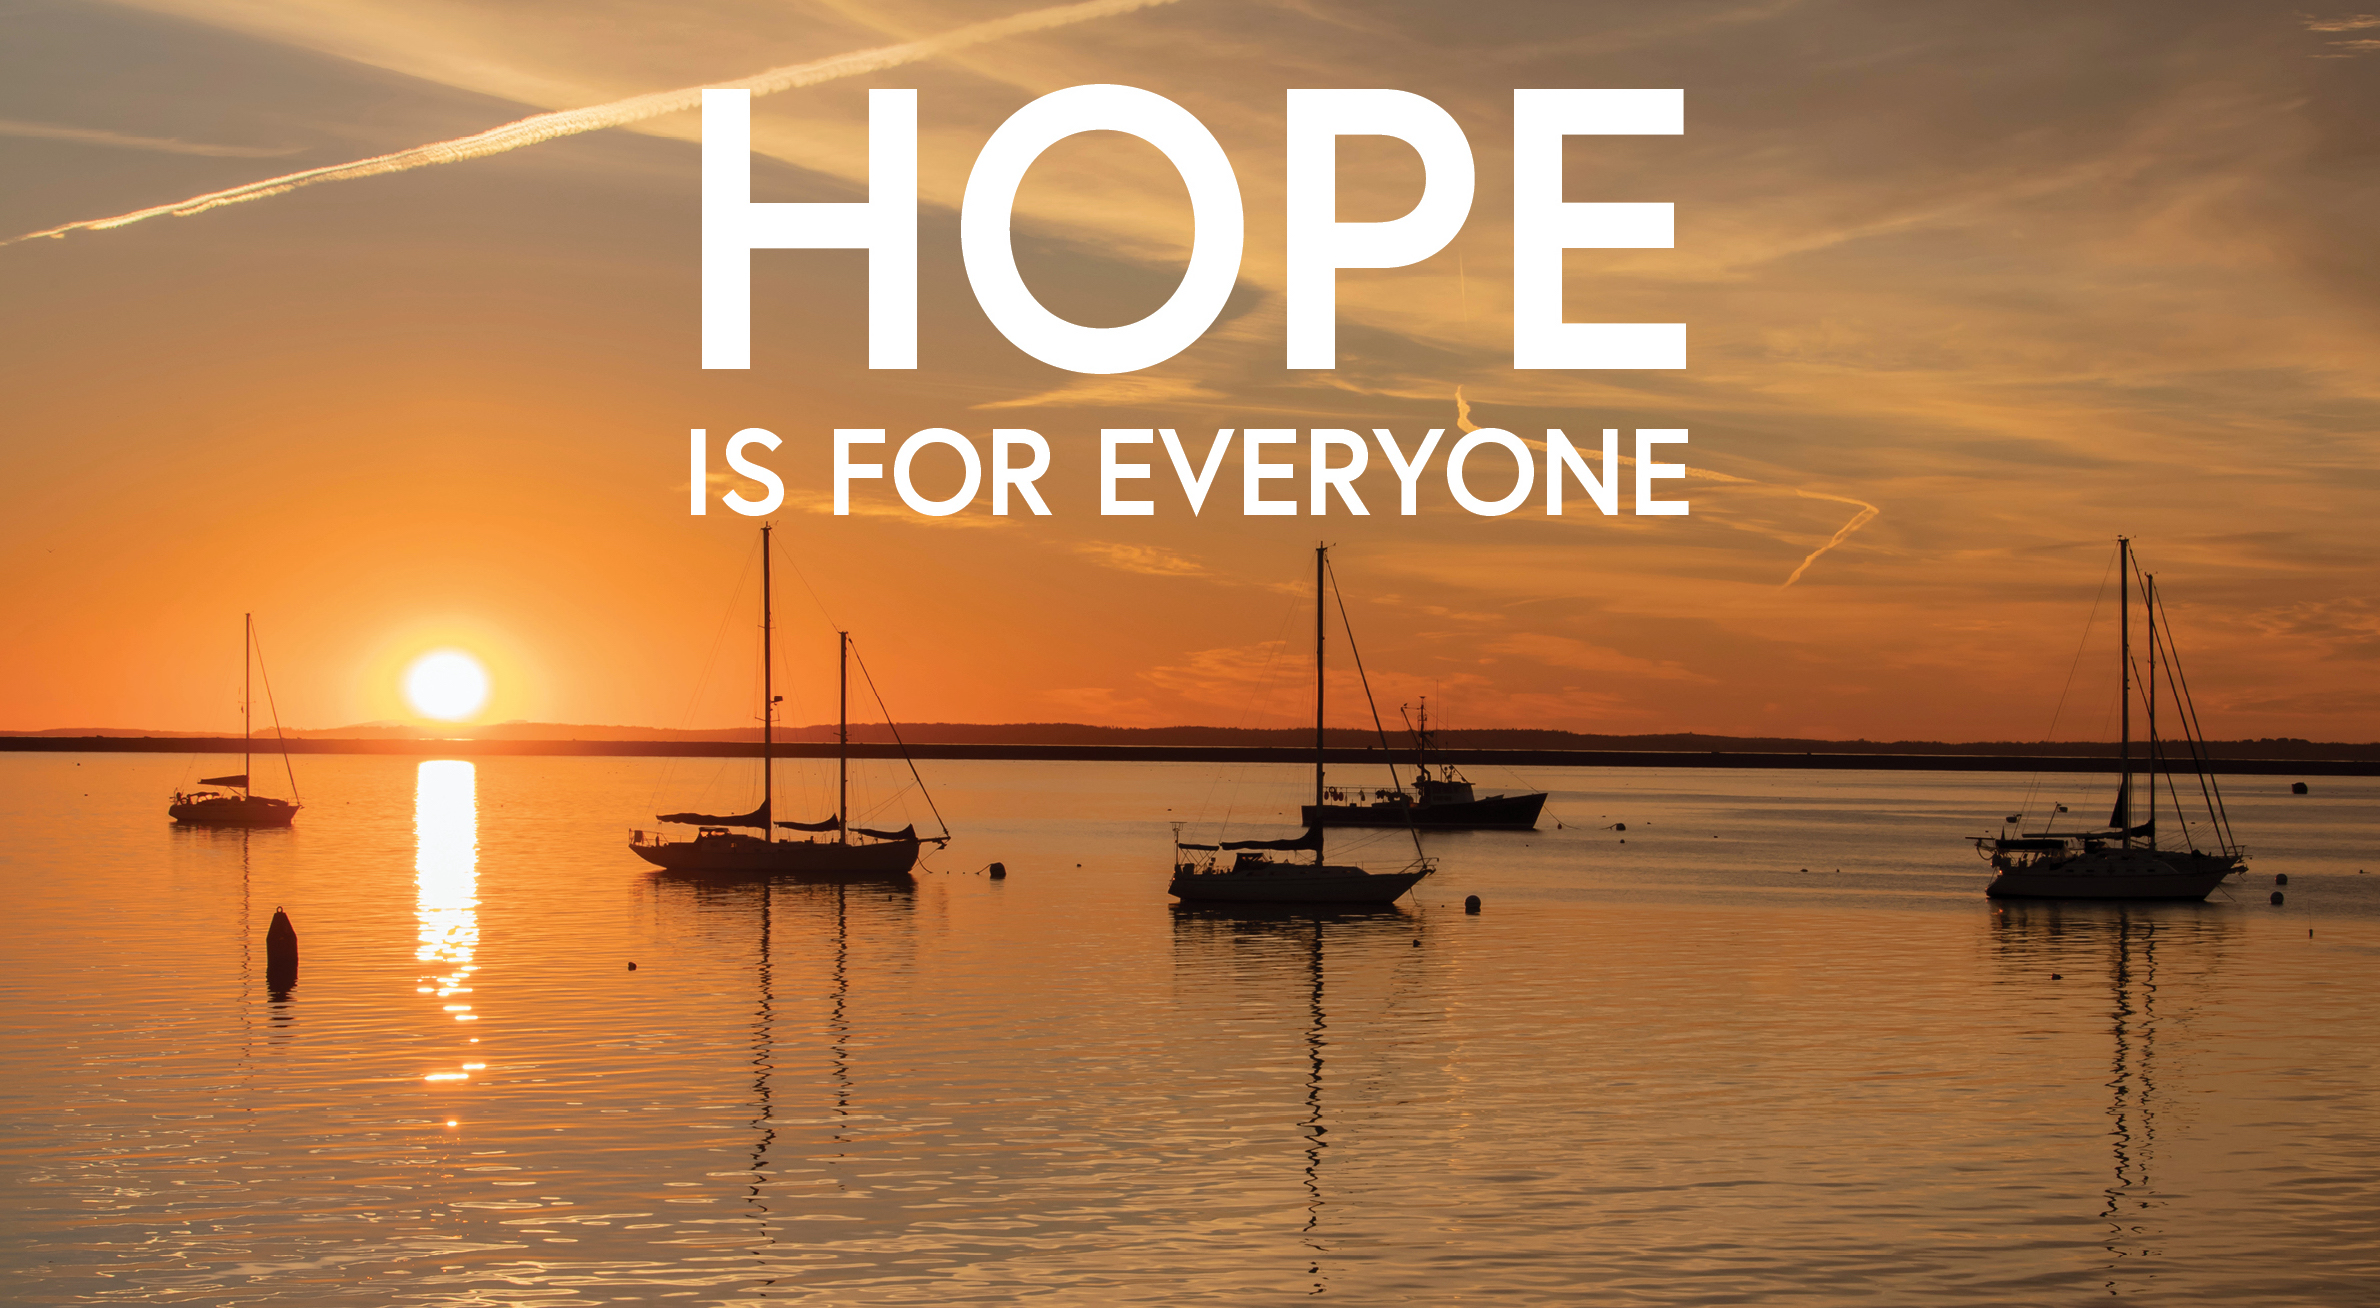 Hope is for everyone boats